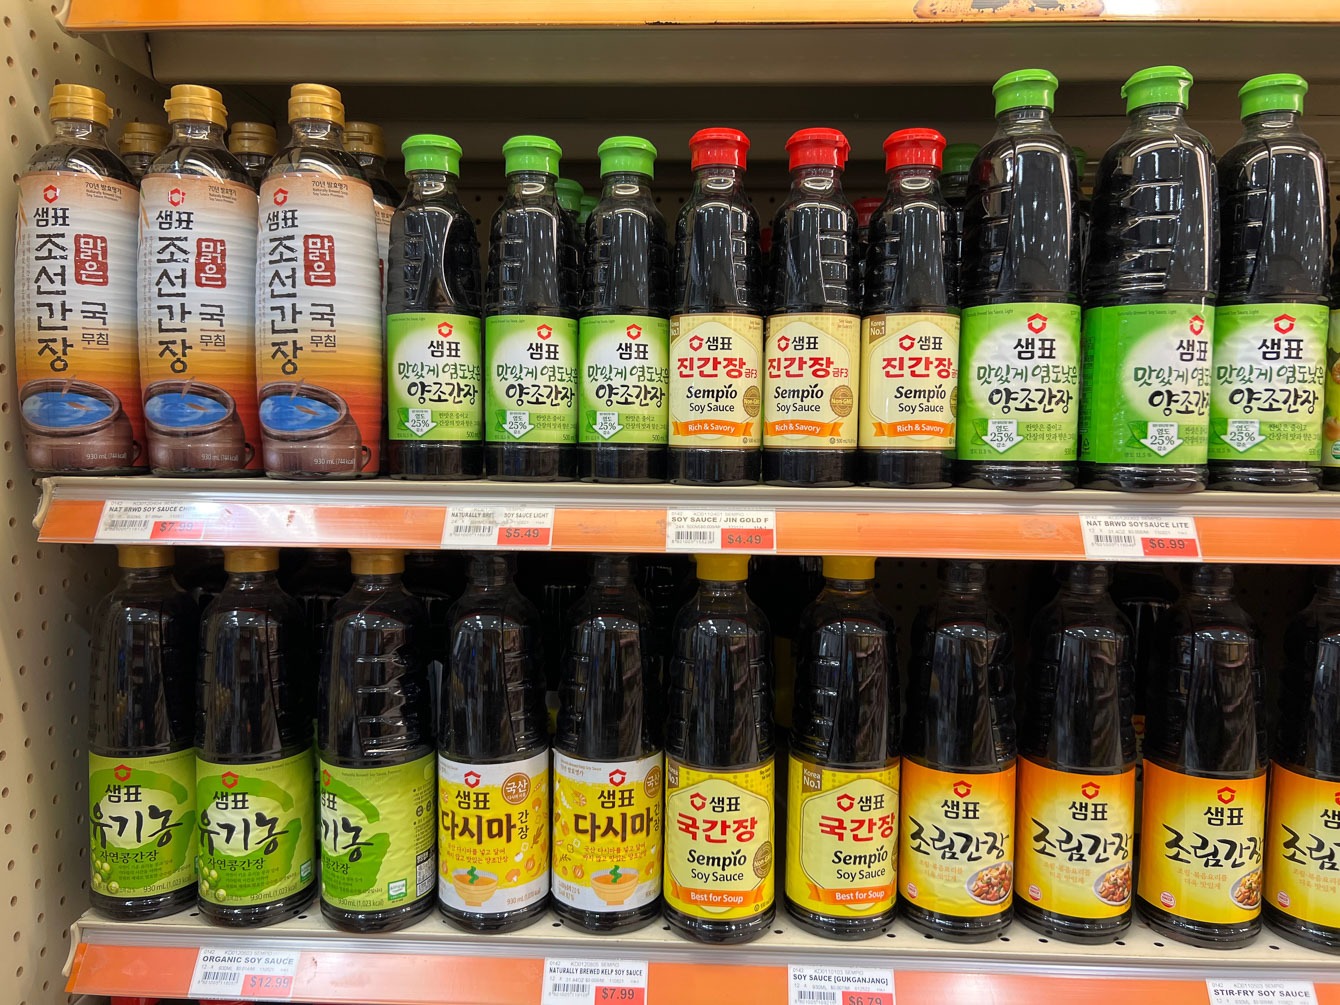 Soy sauce as a must-have Korean condiment and pantry item.